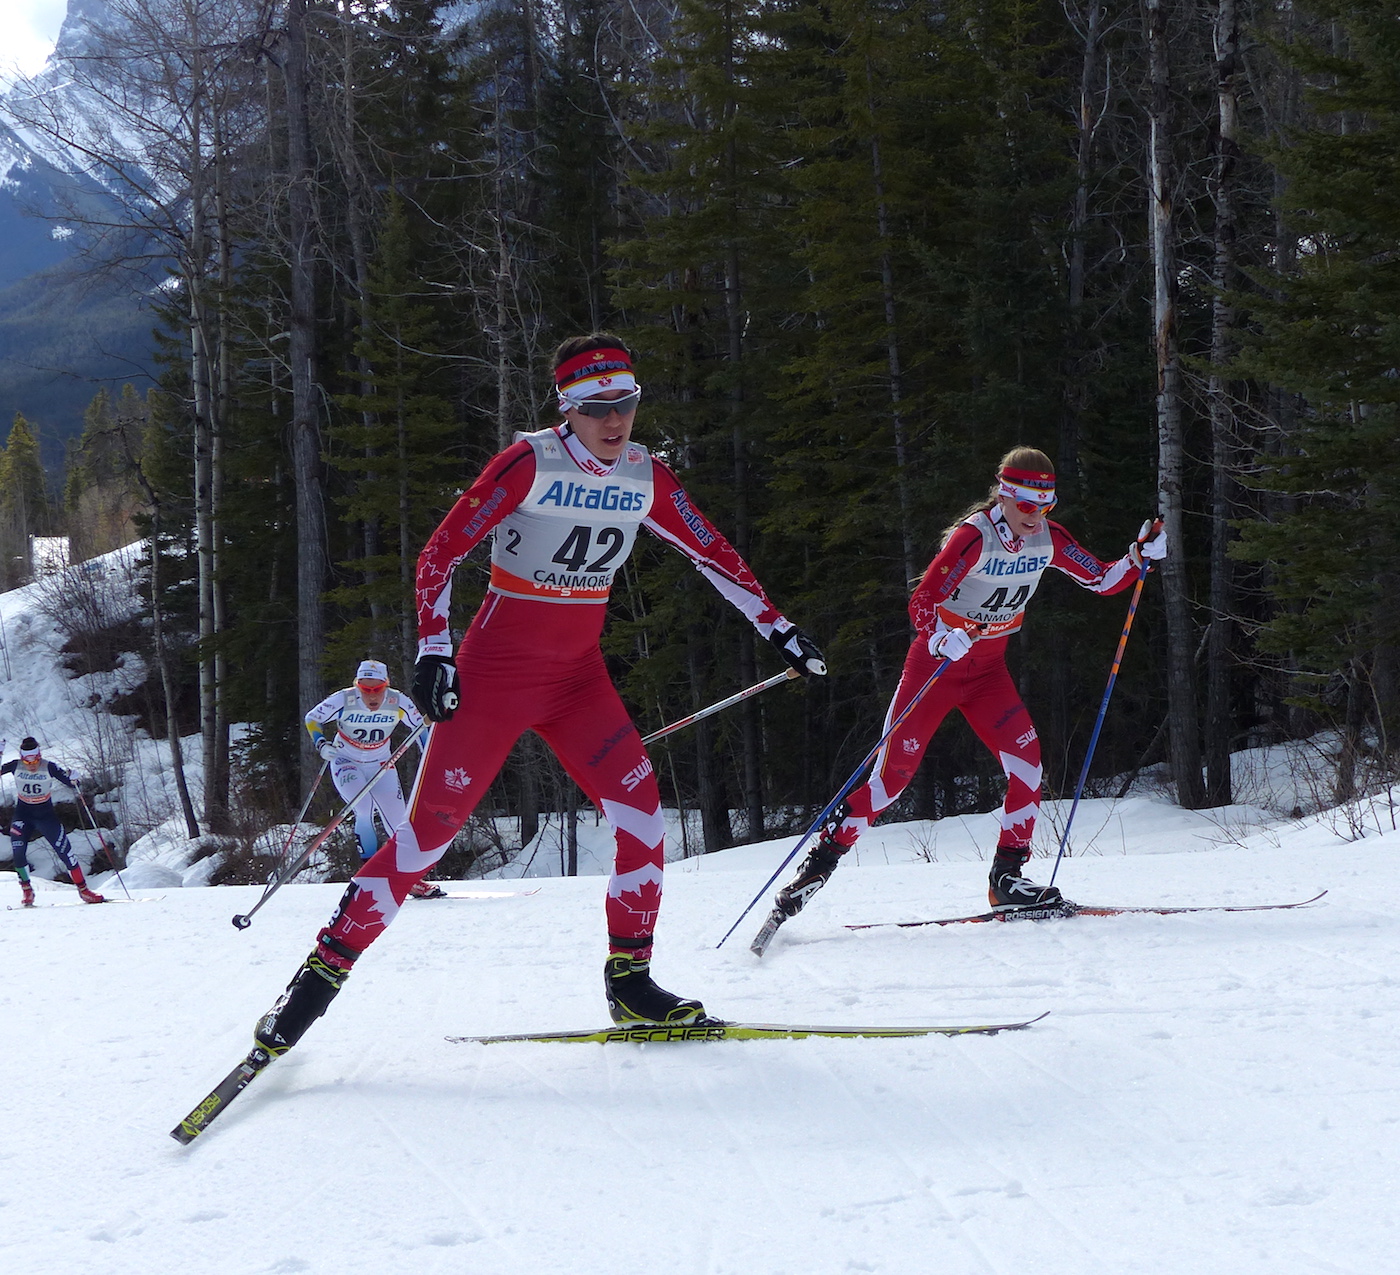 Emily Nishikawa (42) and Canadian teammate Cendrine Browne (44) in the women's 15 k skiathlon at the 2016 Ski Tour Canada in Canmore, Alberta. (Photo: Peggy Hung)